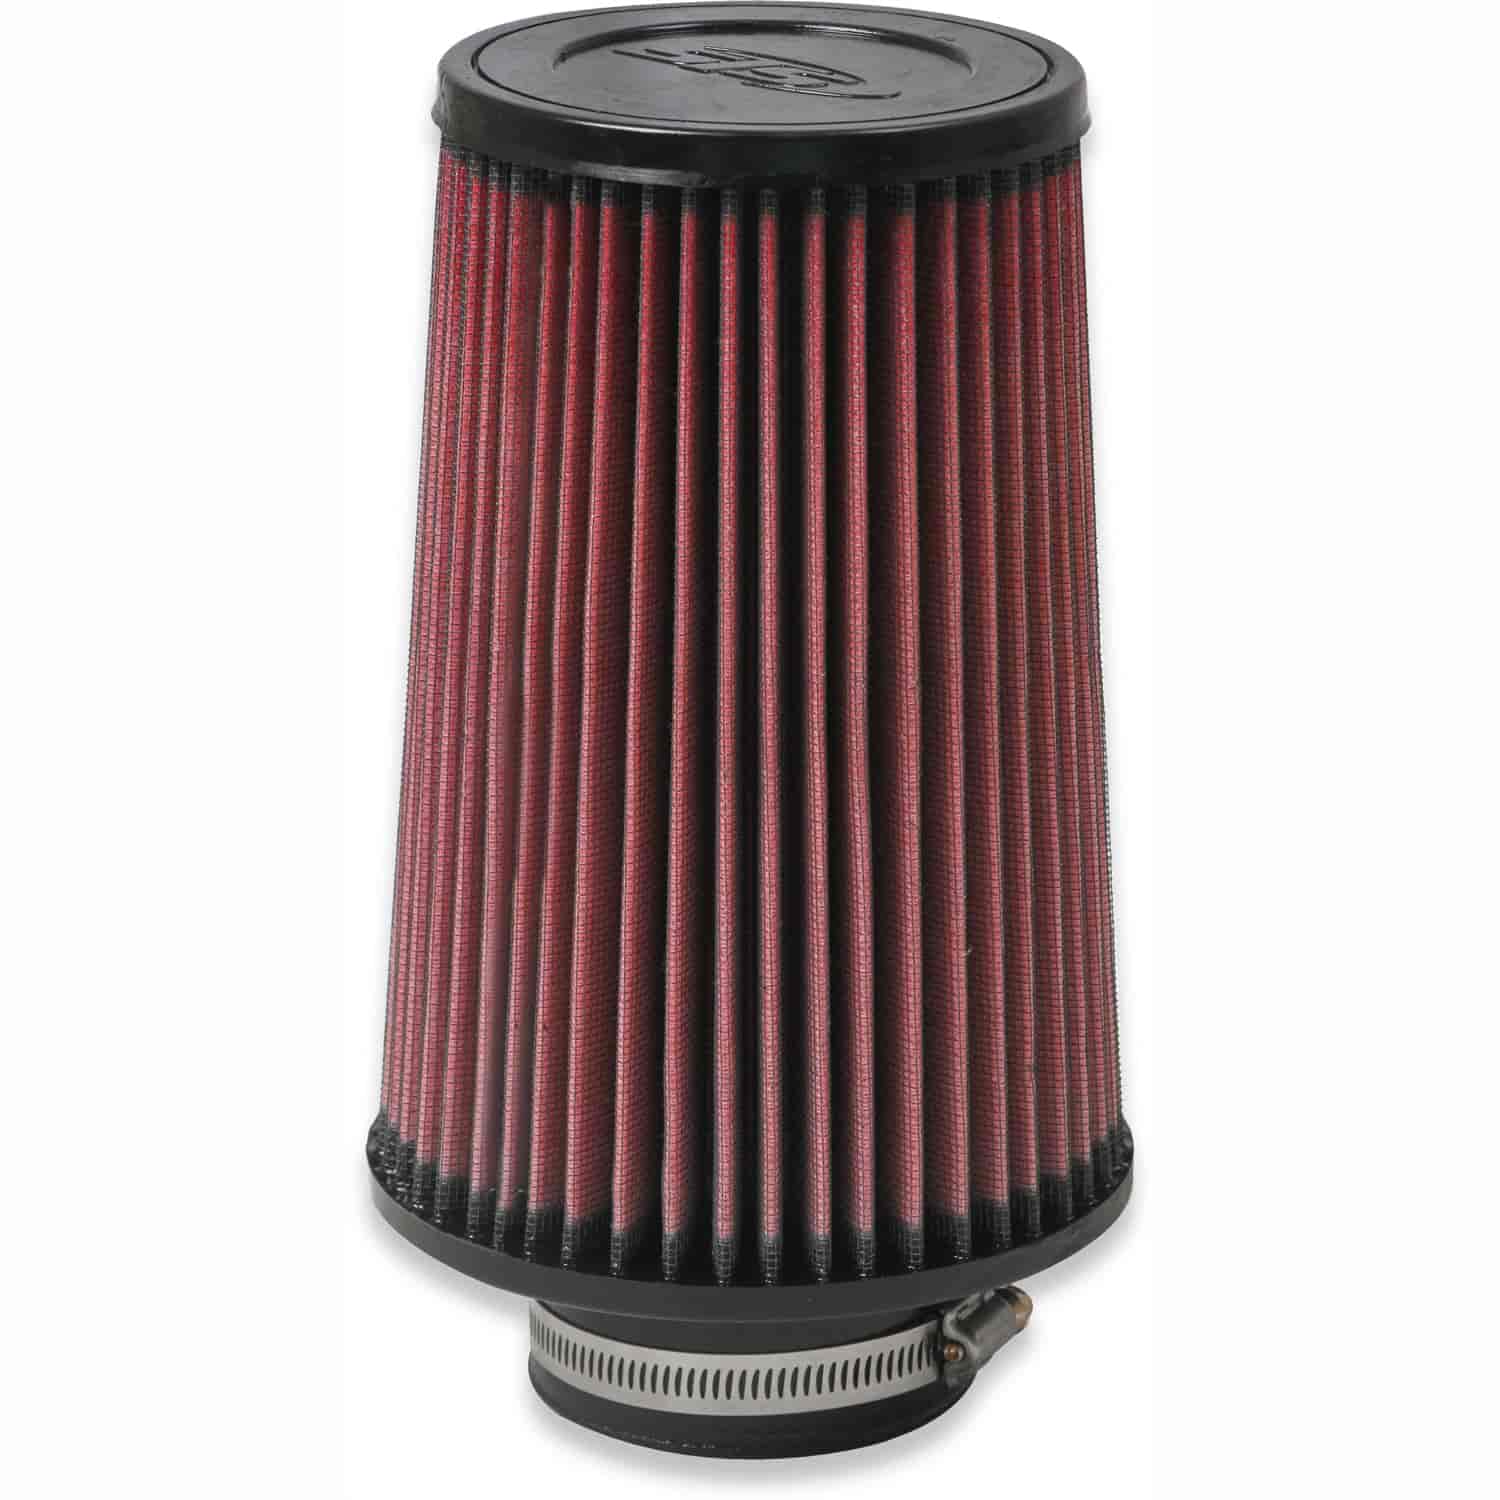 Reusable Round Tapered Cone Air Filter